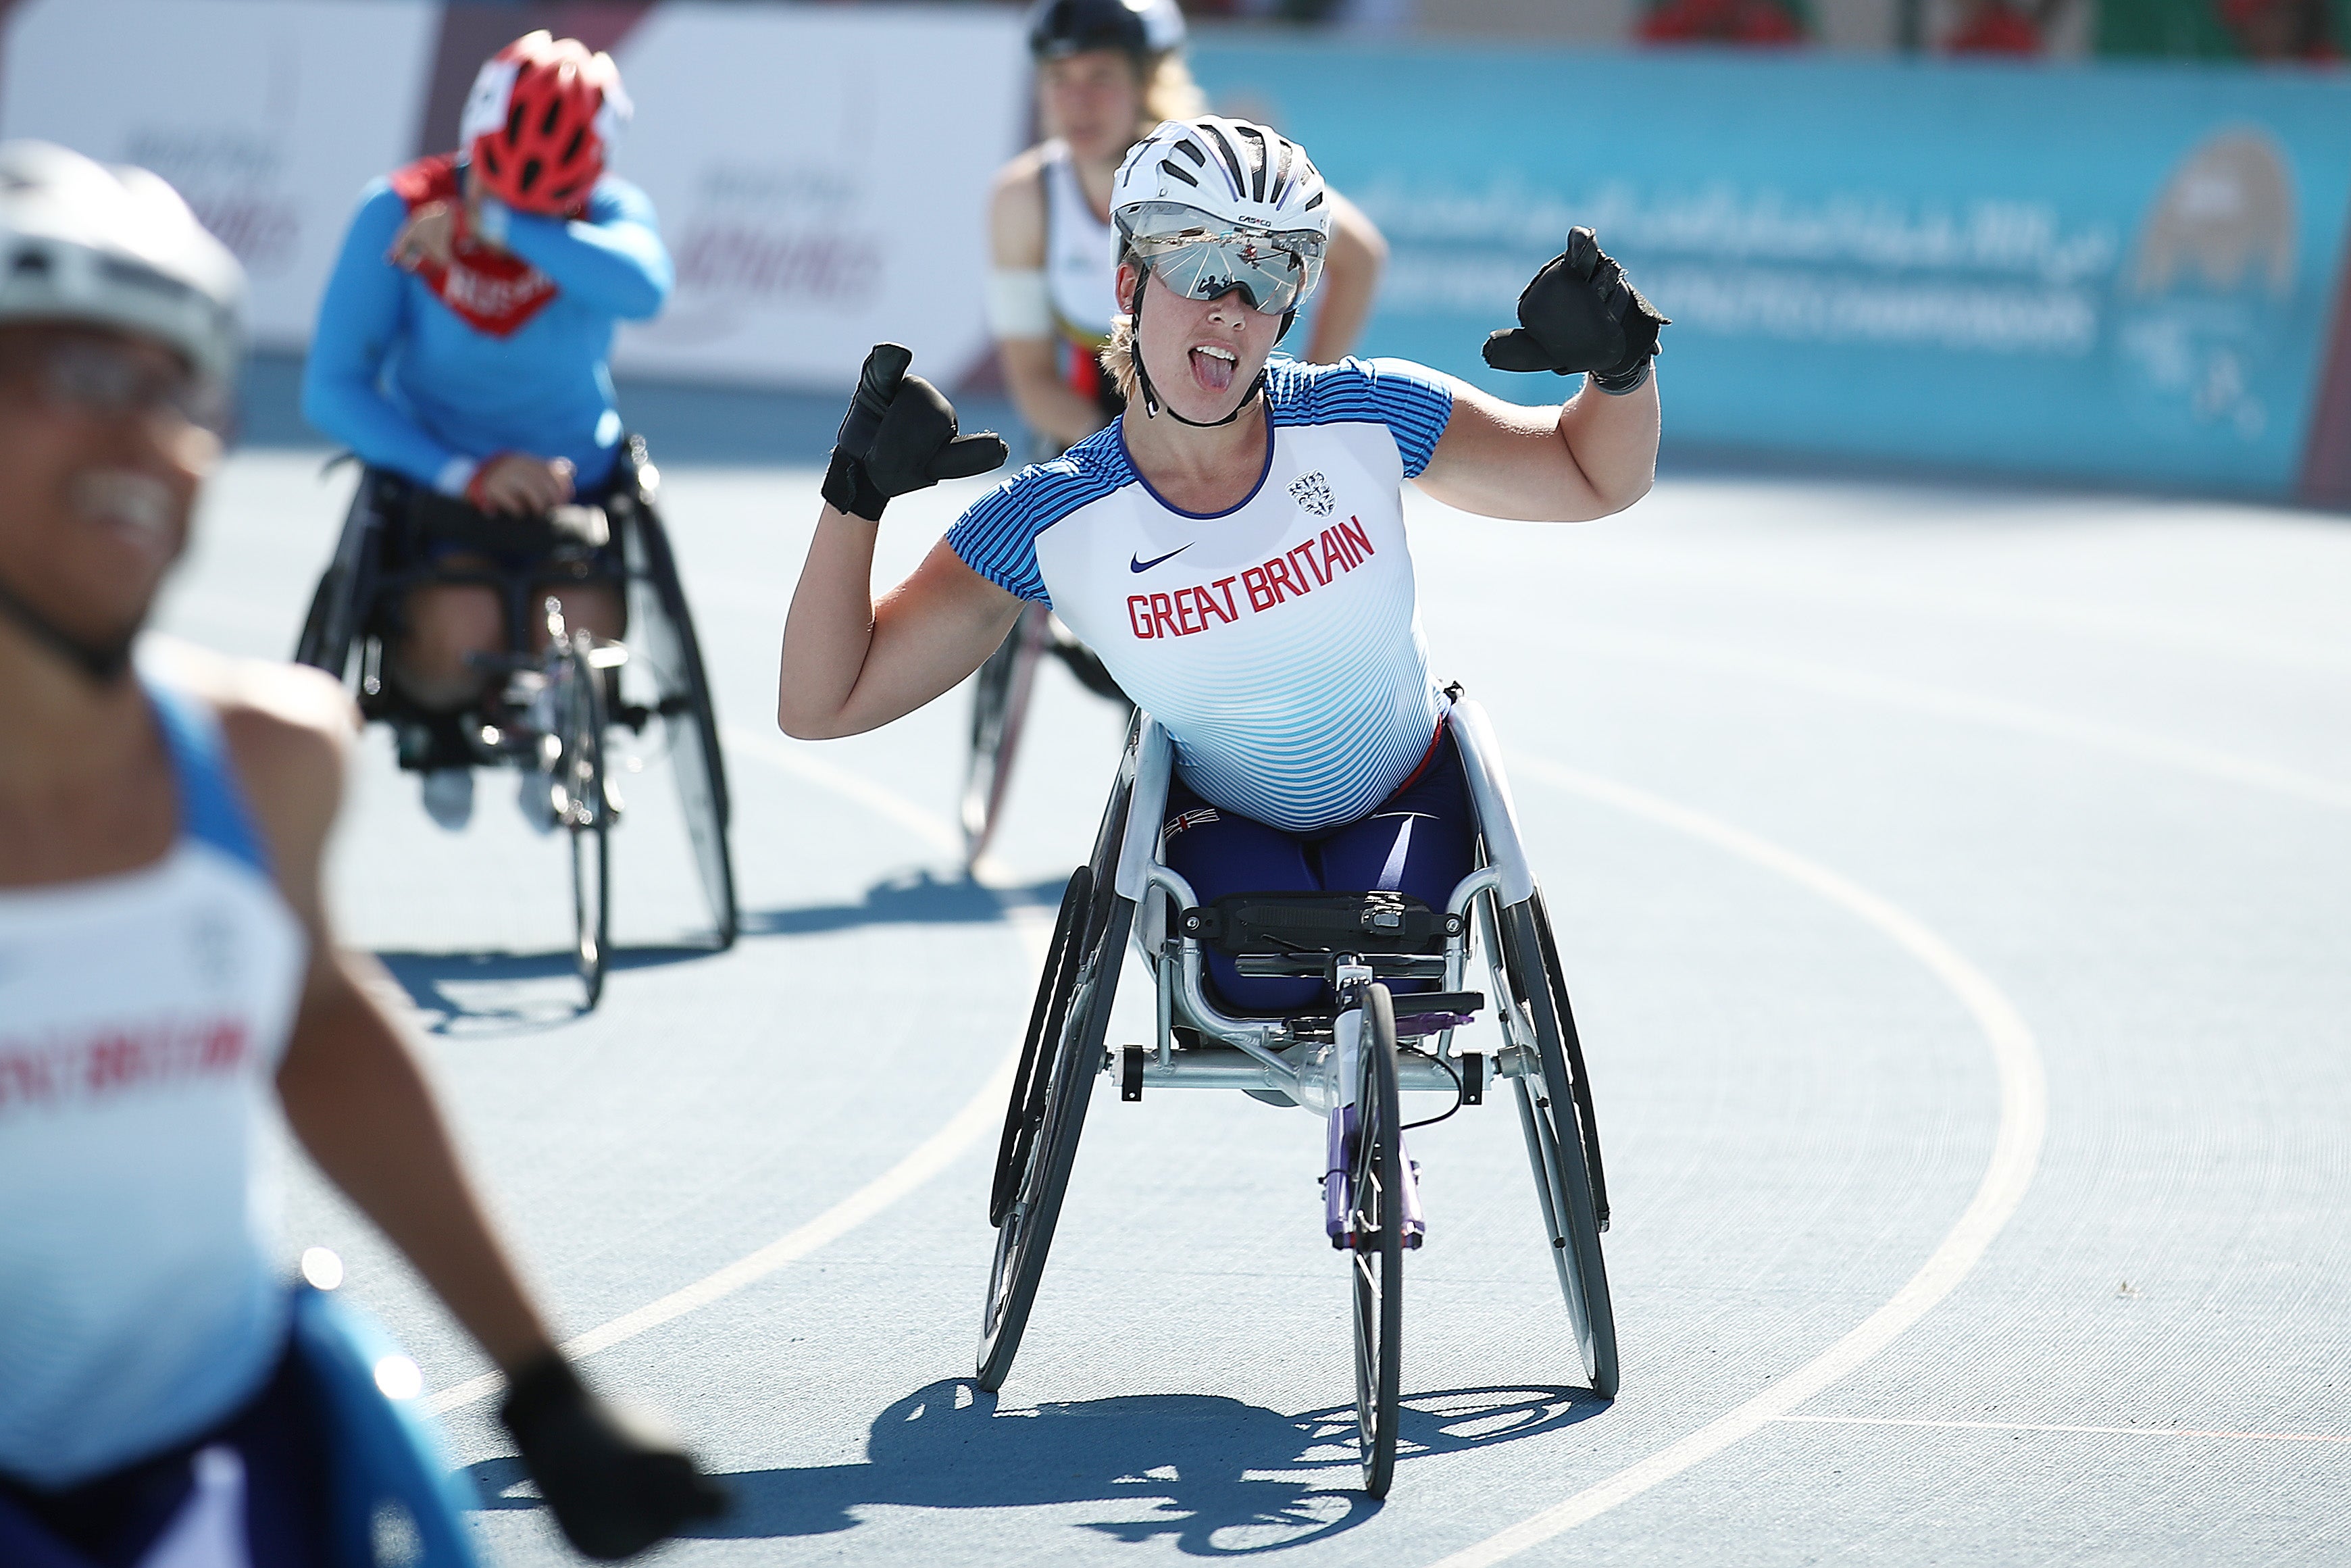 Cockroft is a five-time Paralympic champion